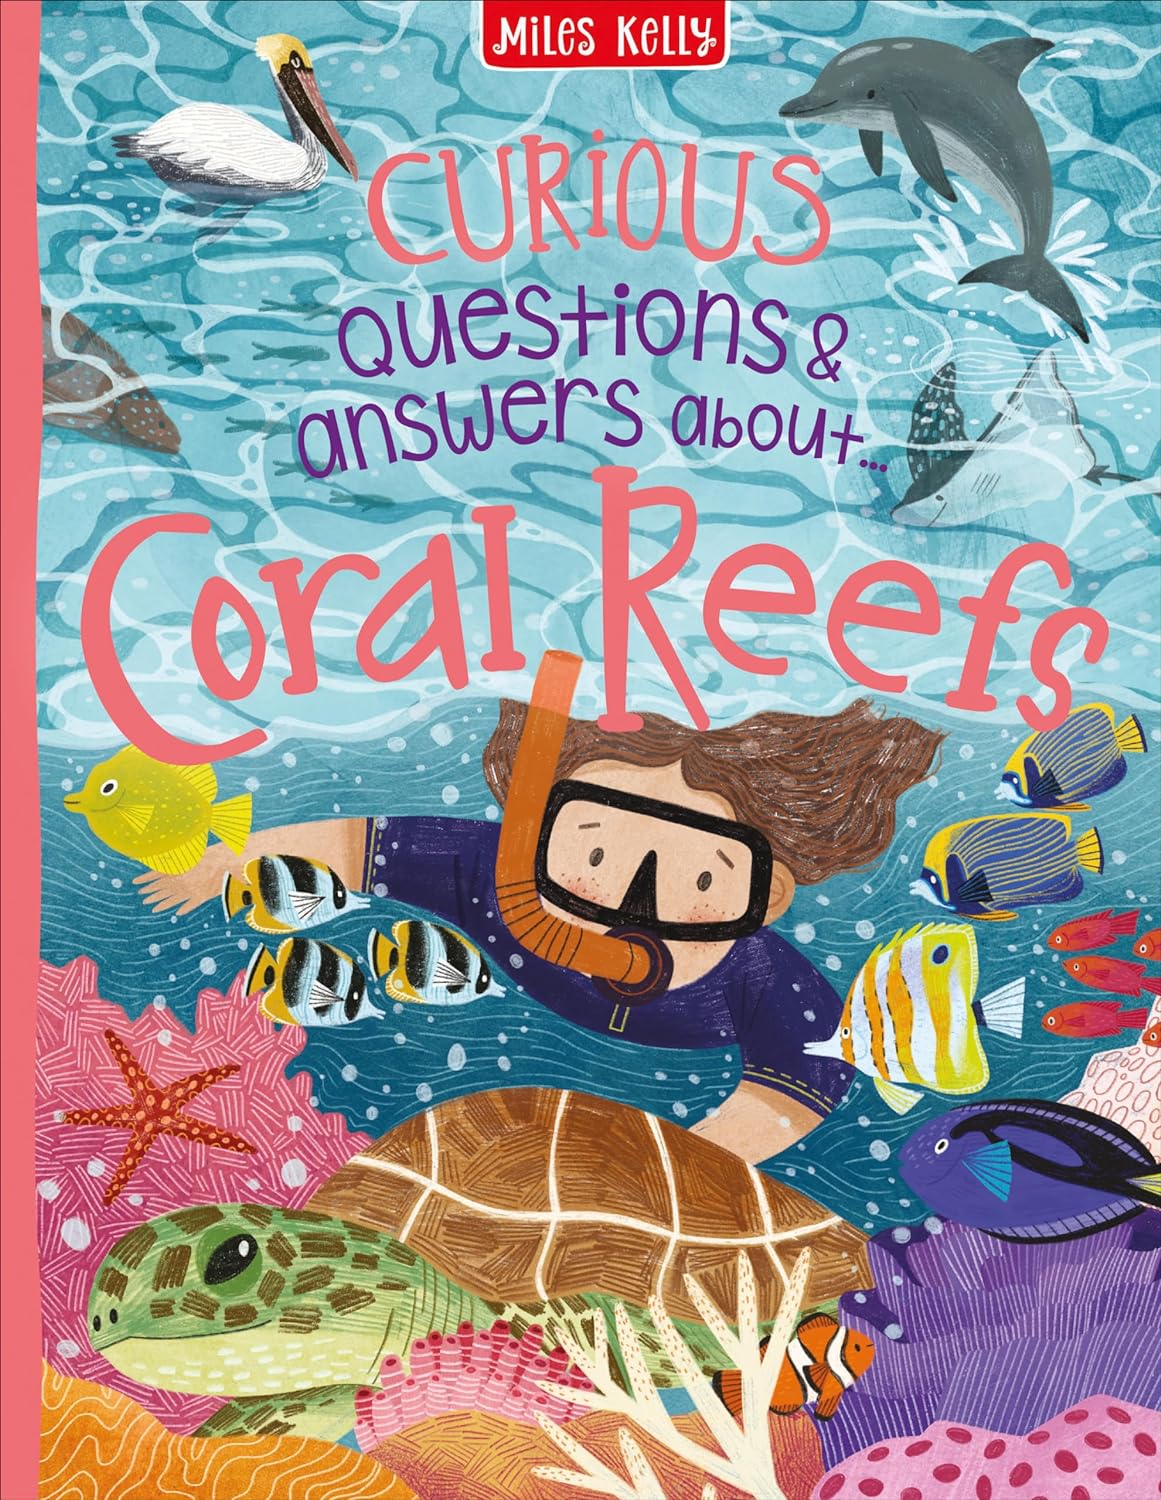 Curious Questions & Answers about Coral Reefs